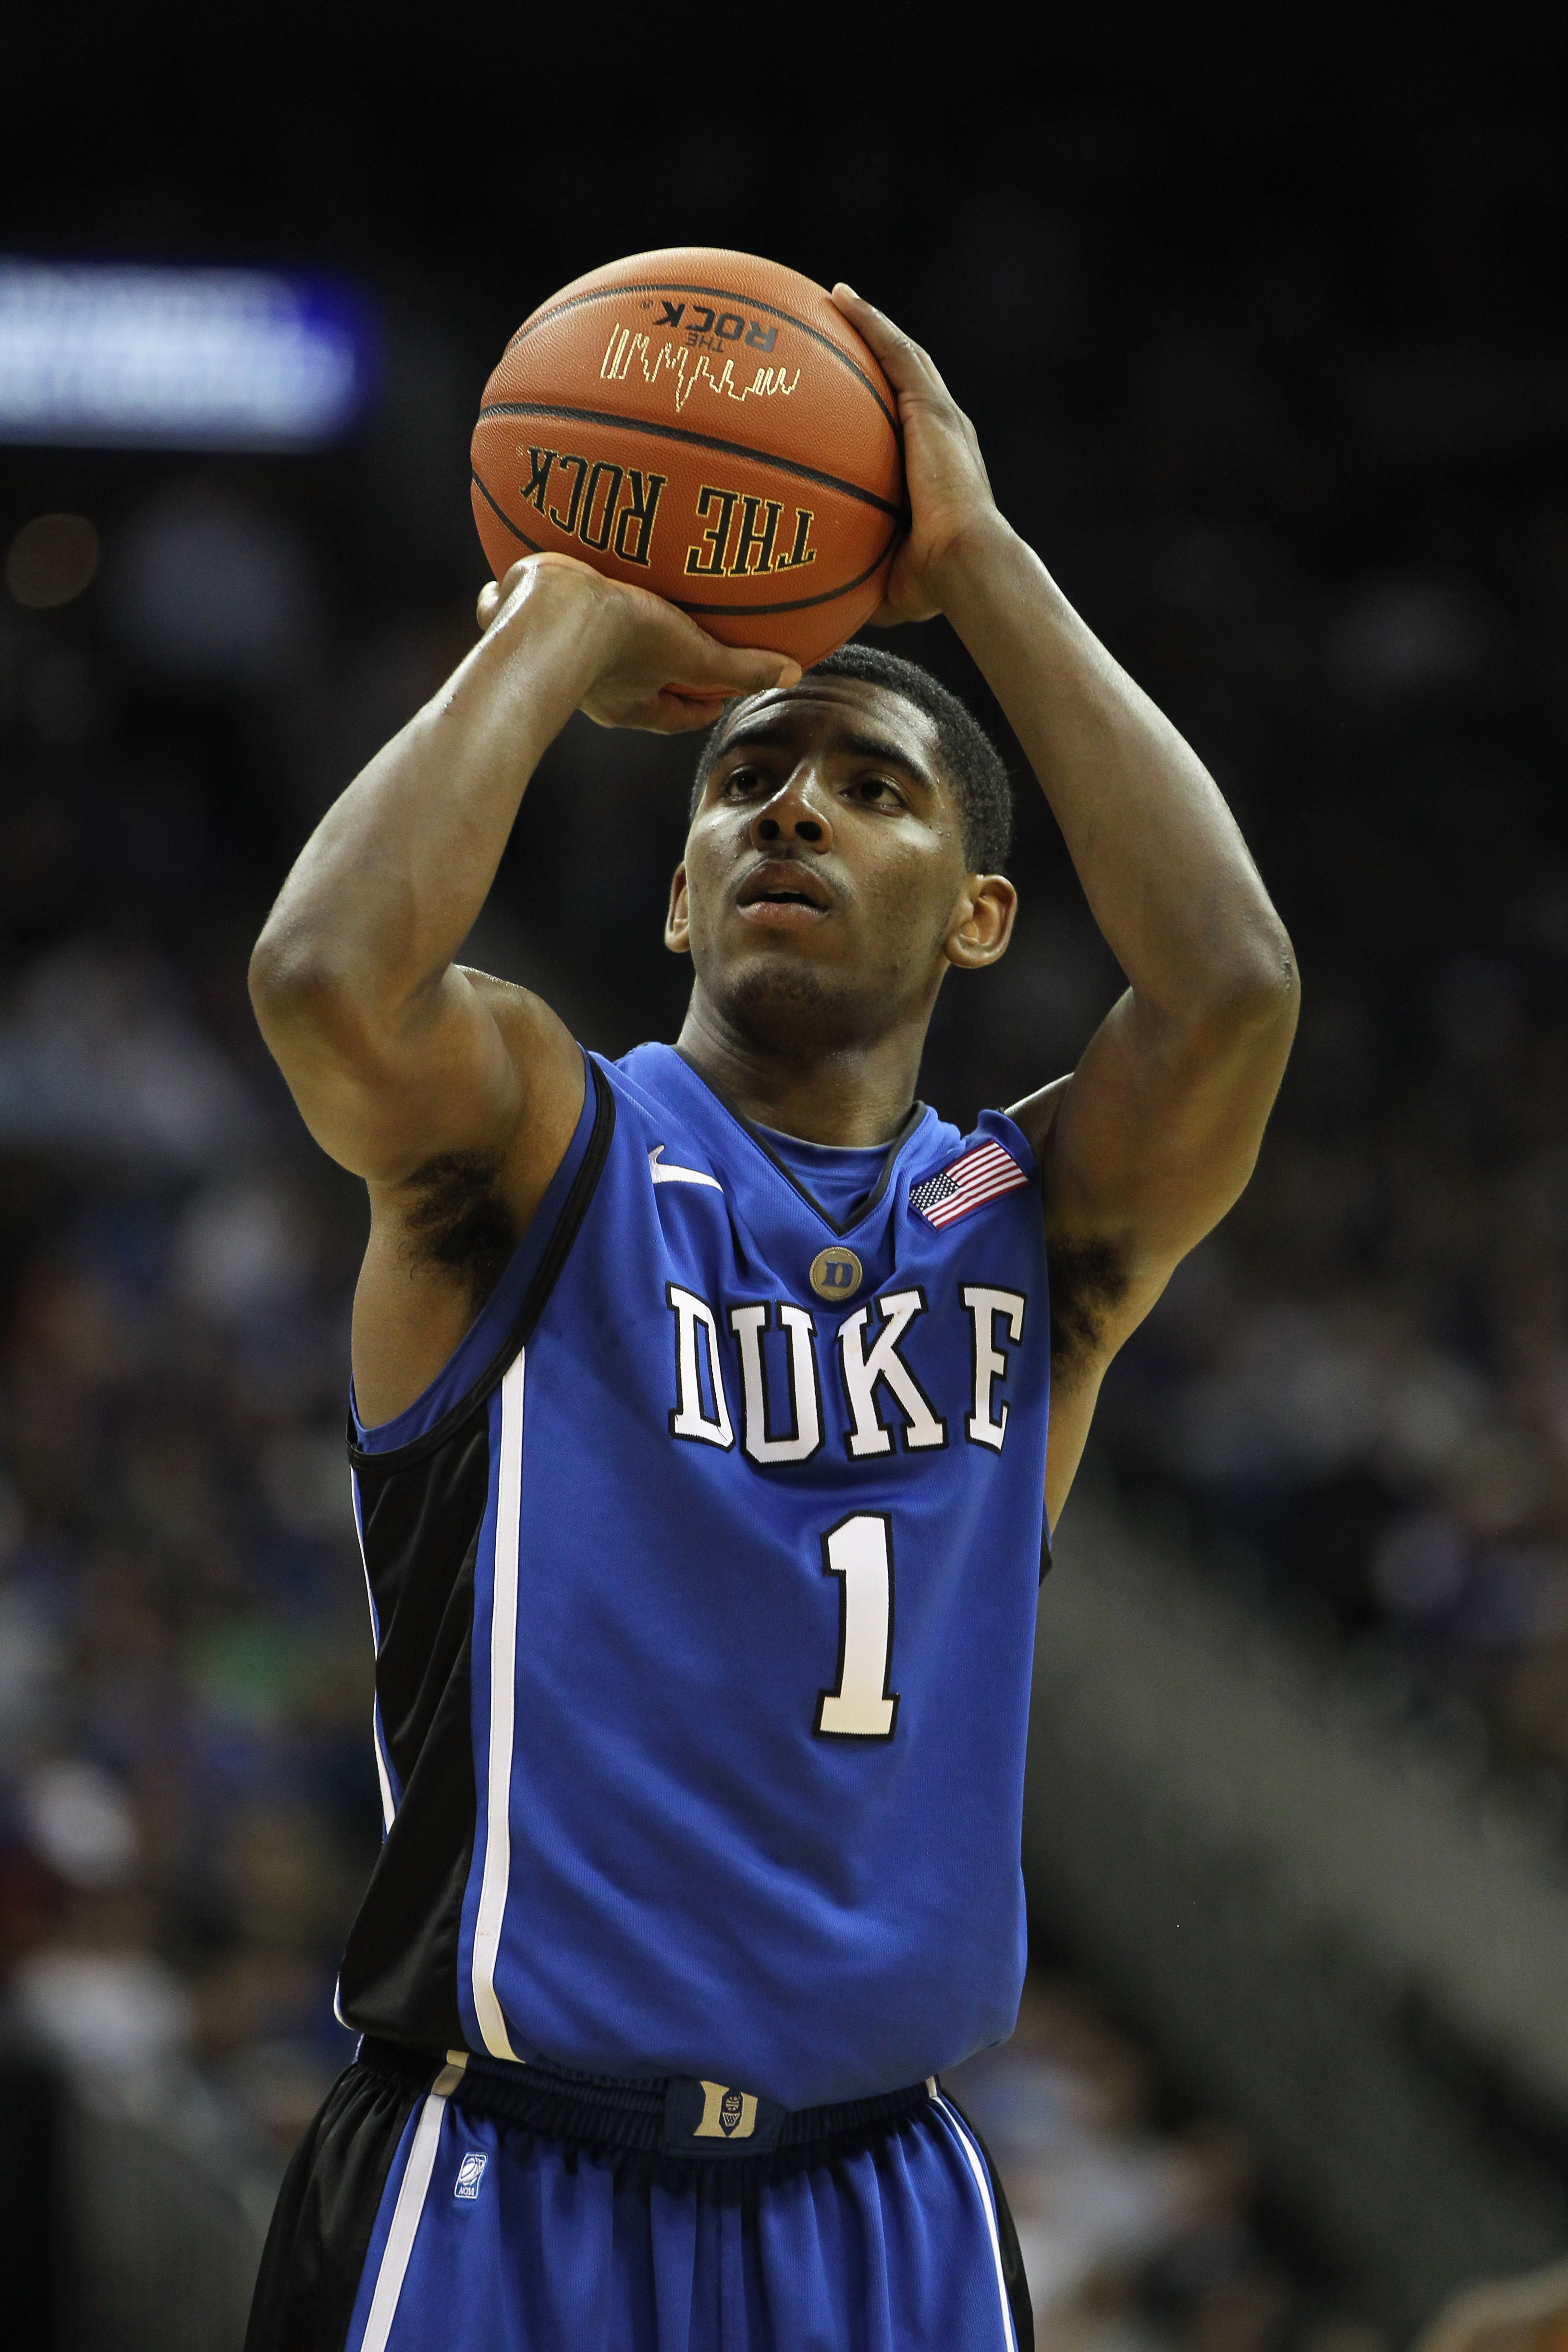 Kyrie Irving honors his super-brief Duke career with latest